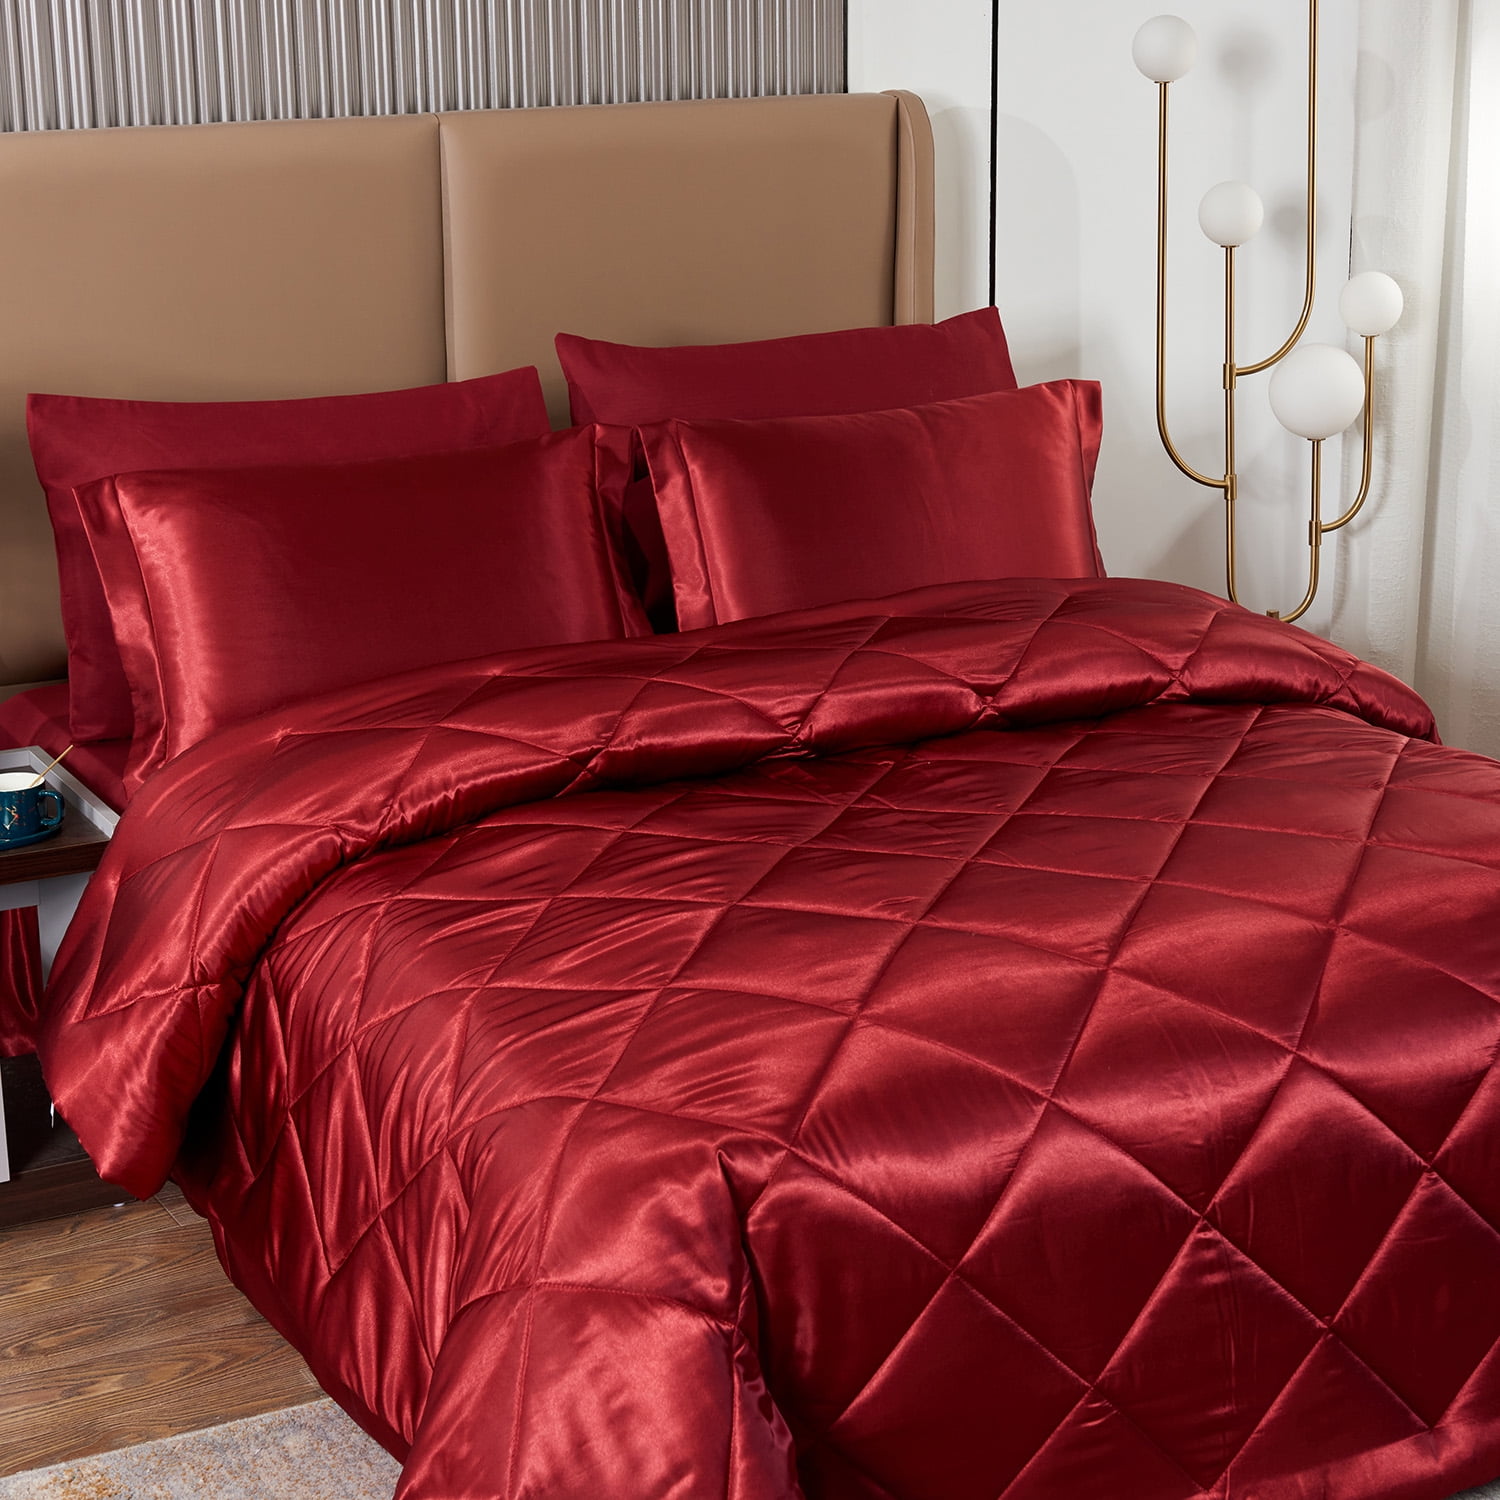 Choose Sheet Set-Fitted/Flat/Bed Skirt 1000 TC Egyptian Cotton Burgundy Solid 